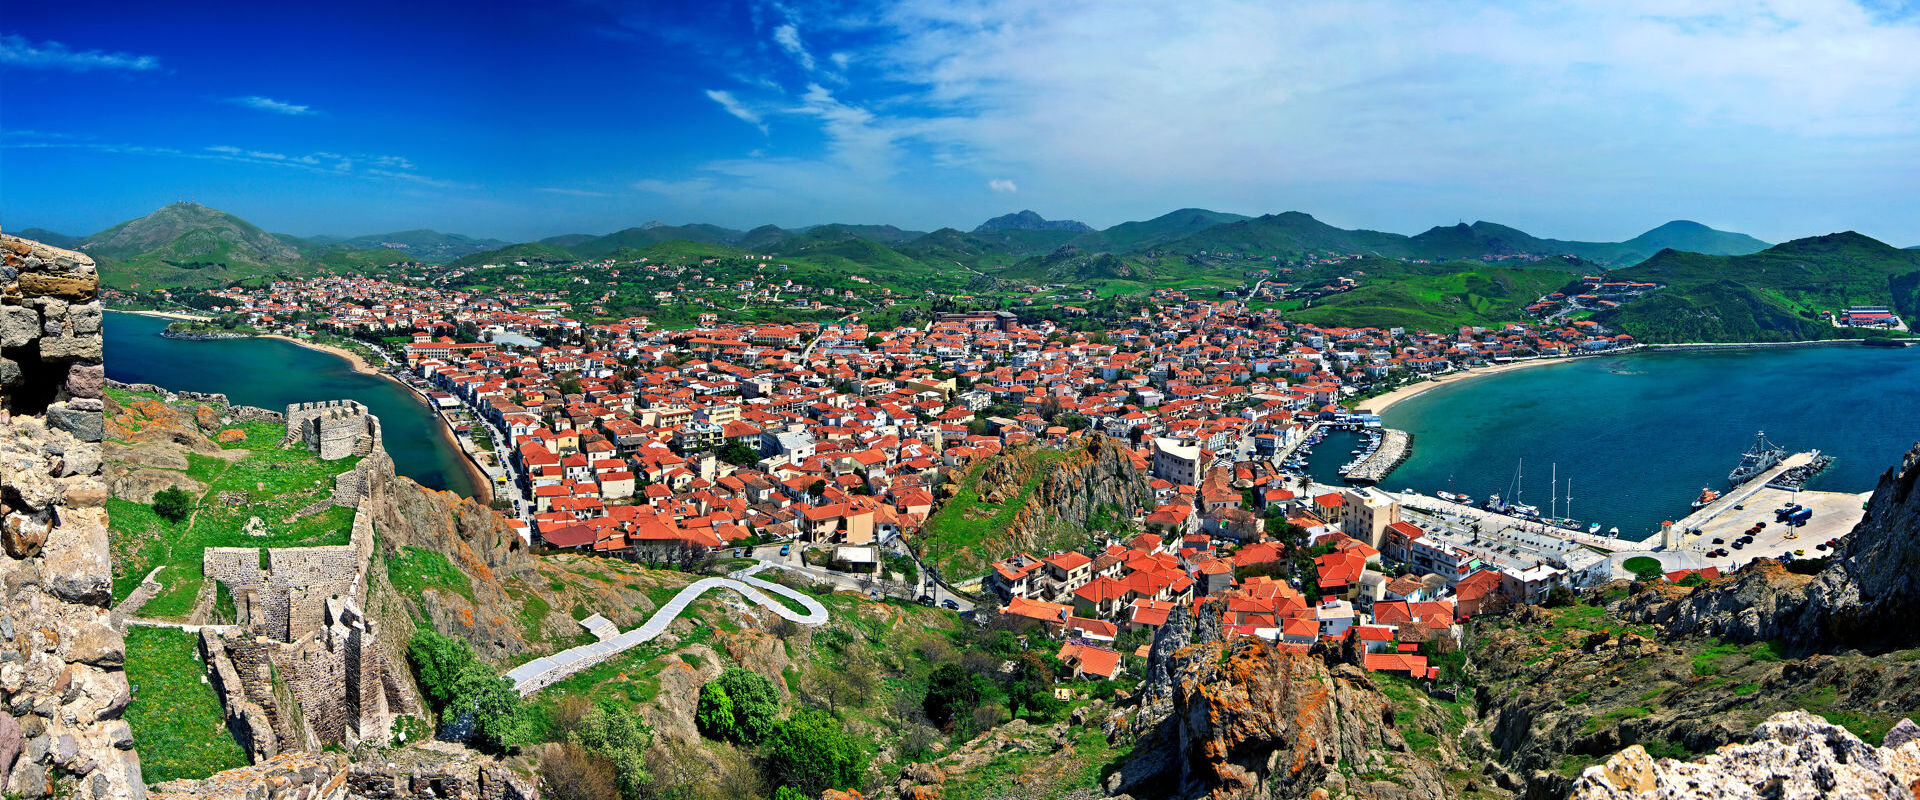 Panoramic view of Myrina town, the capital of Lemnos island from its castle